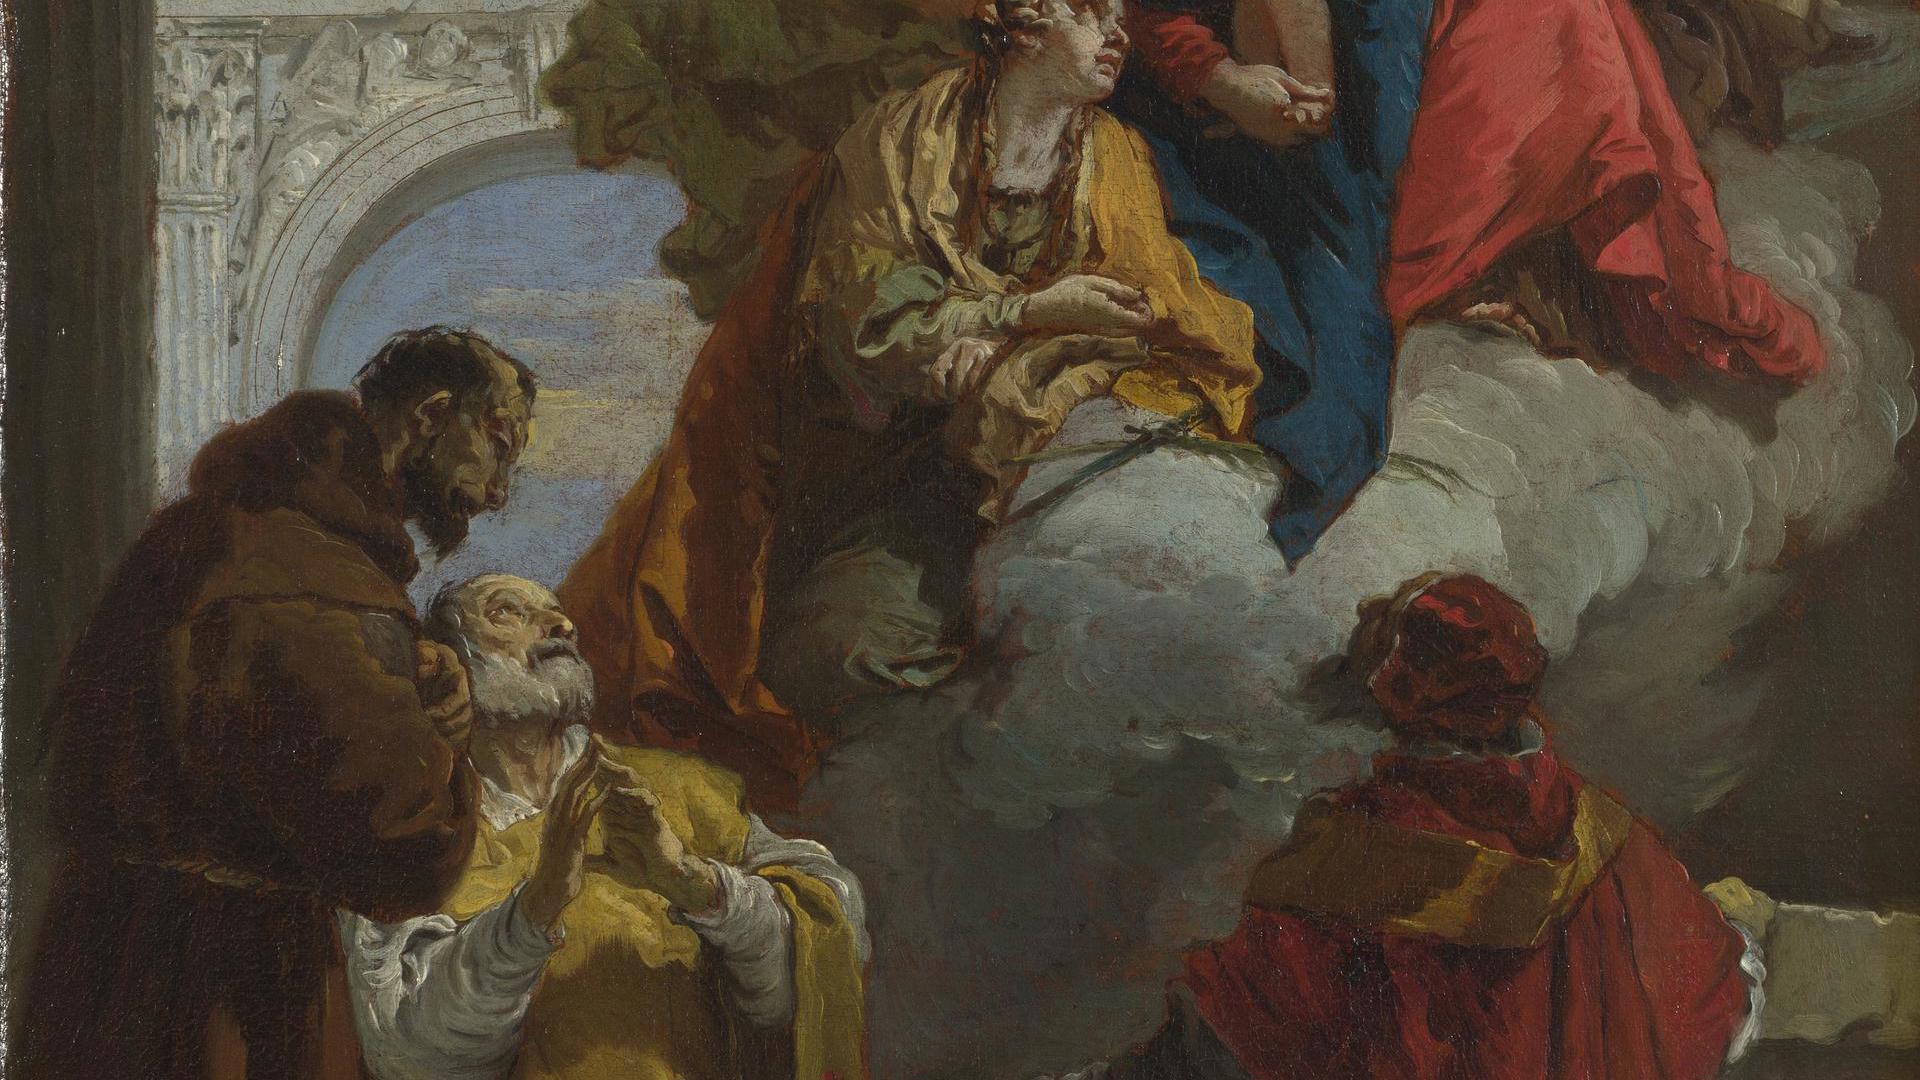 The Virgin and Child appearing to a Group of Saints by Giovanni Battista Tiepolo